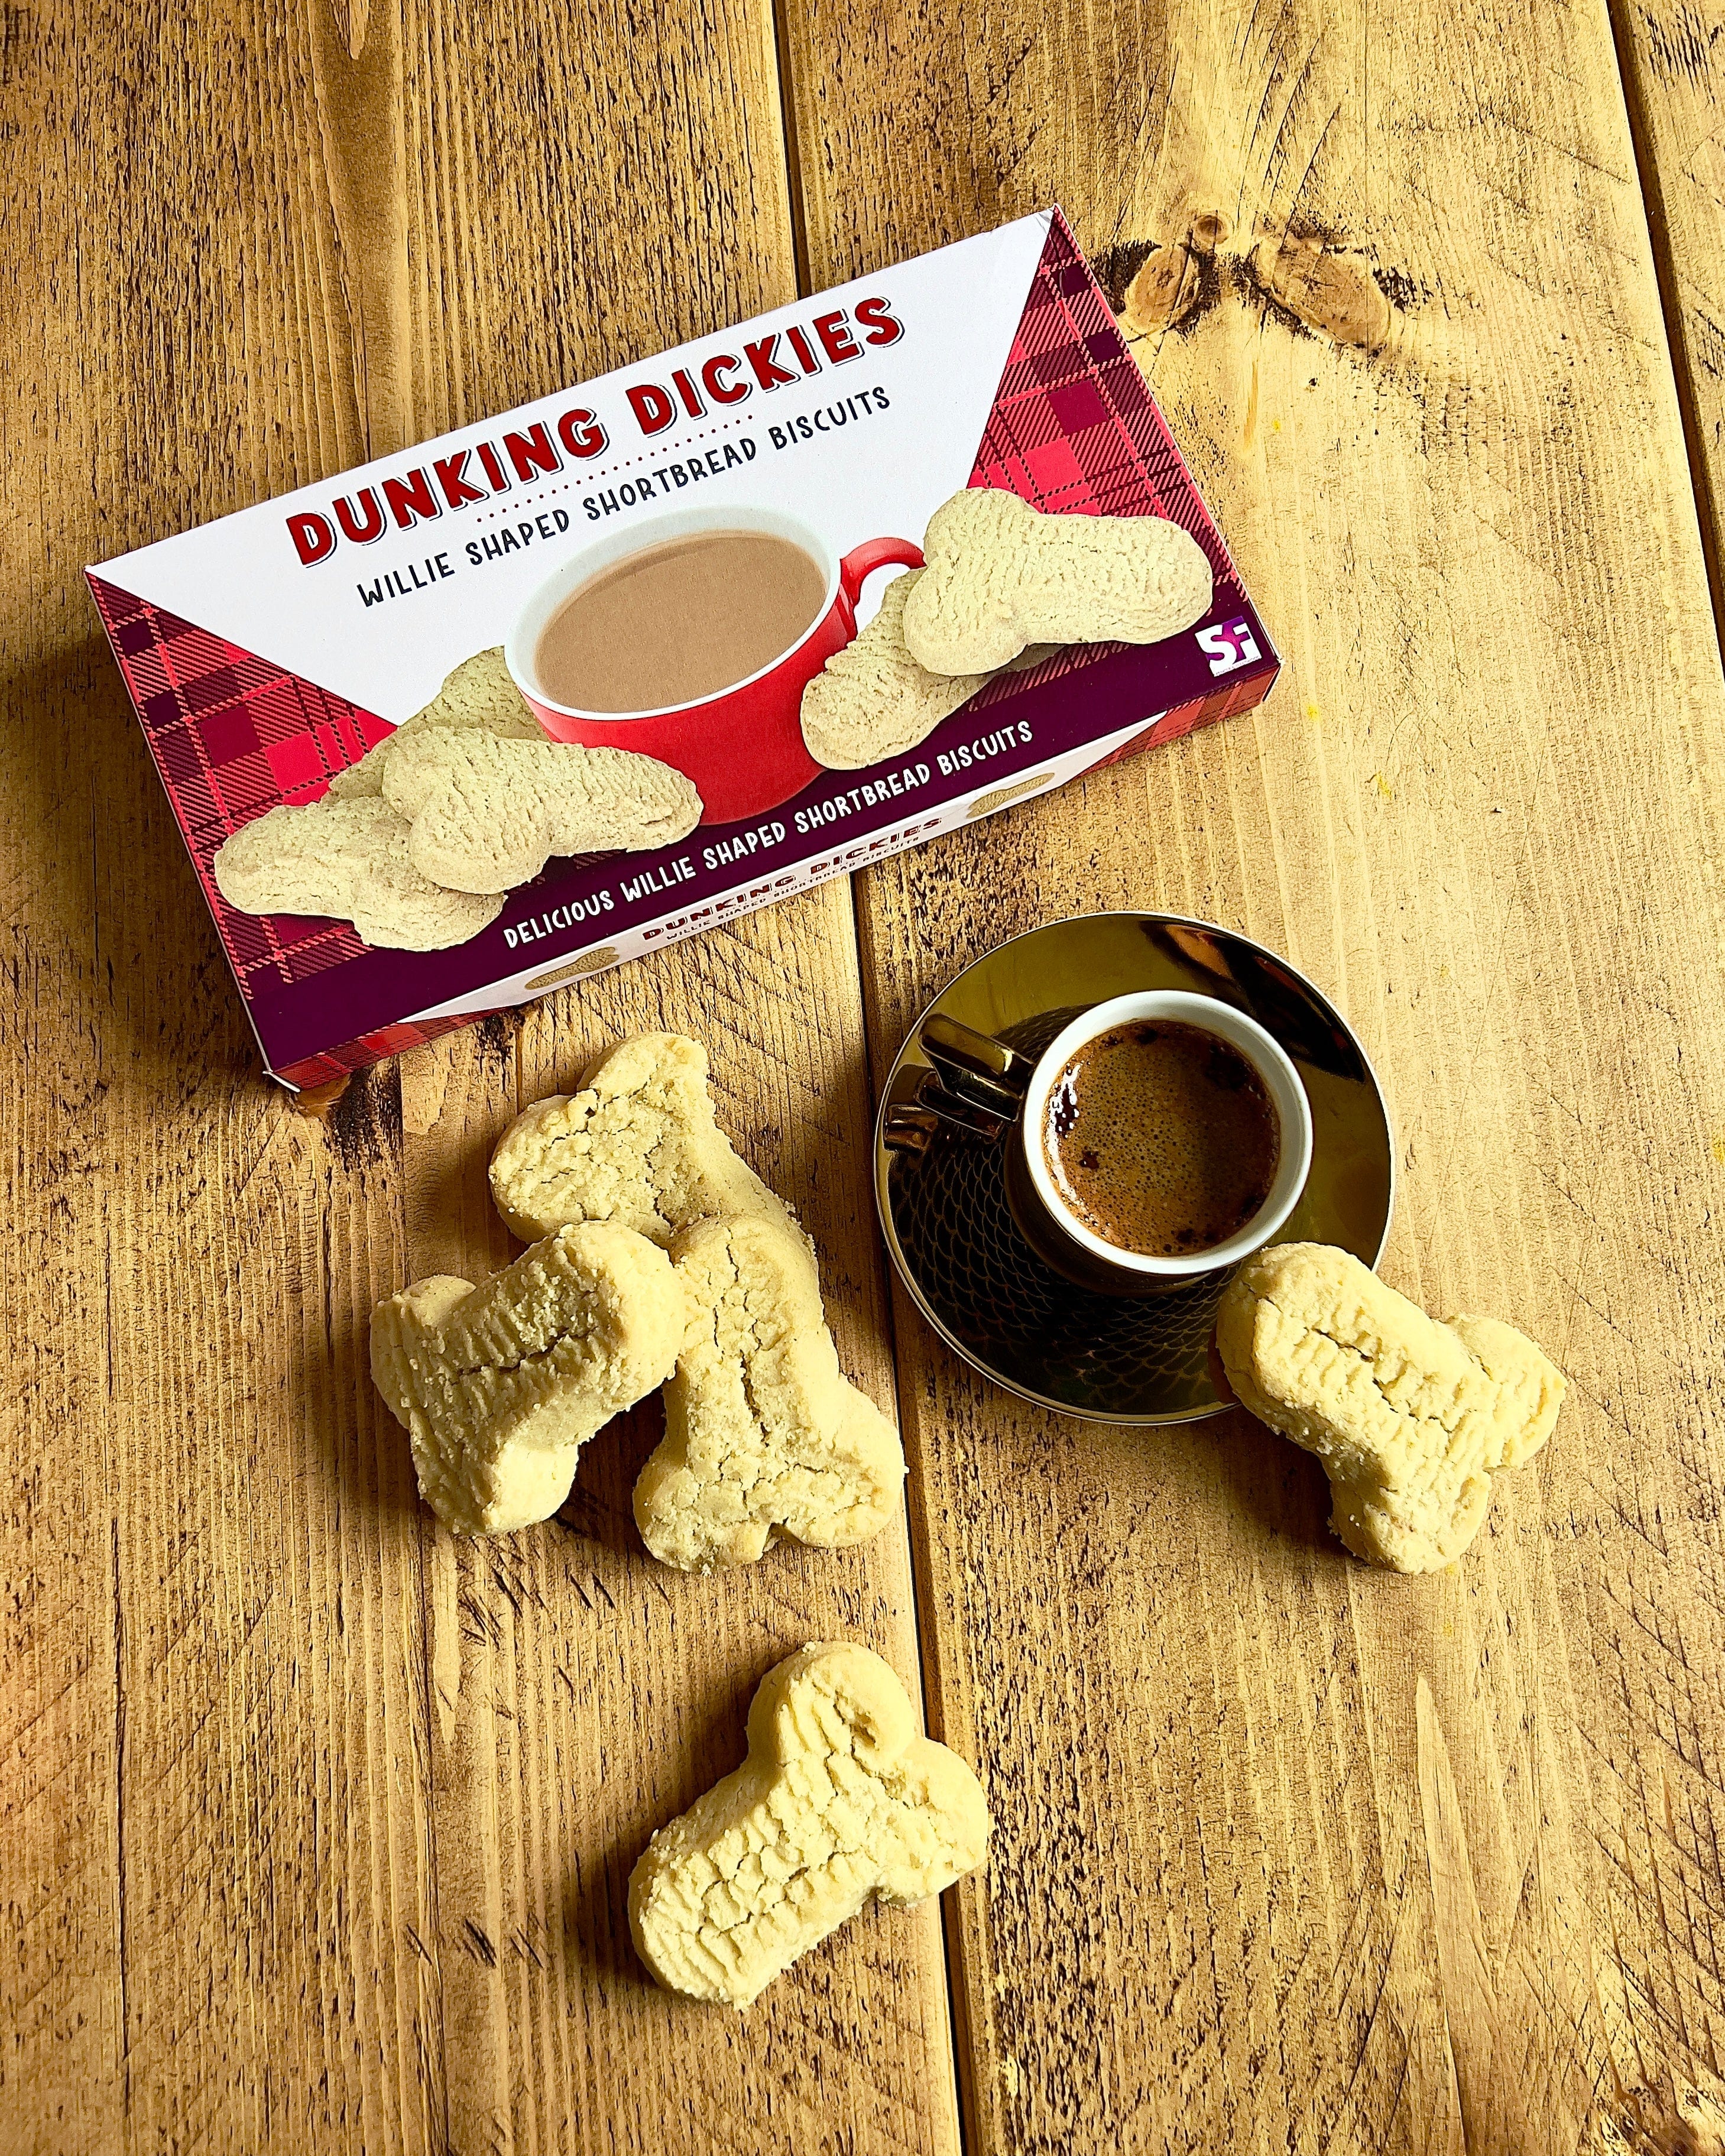 Dunking dickies - dick shortbread biscuits